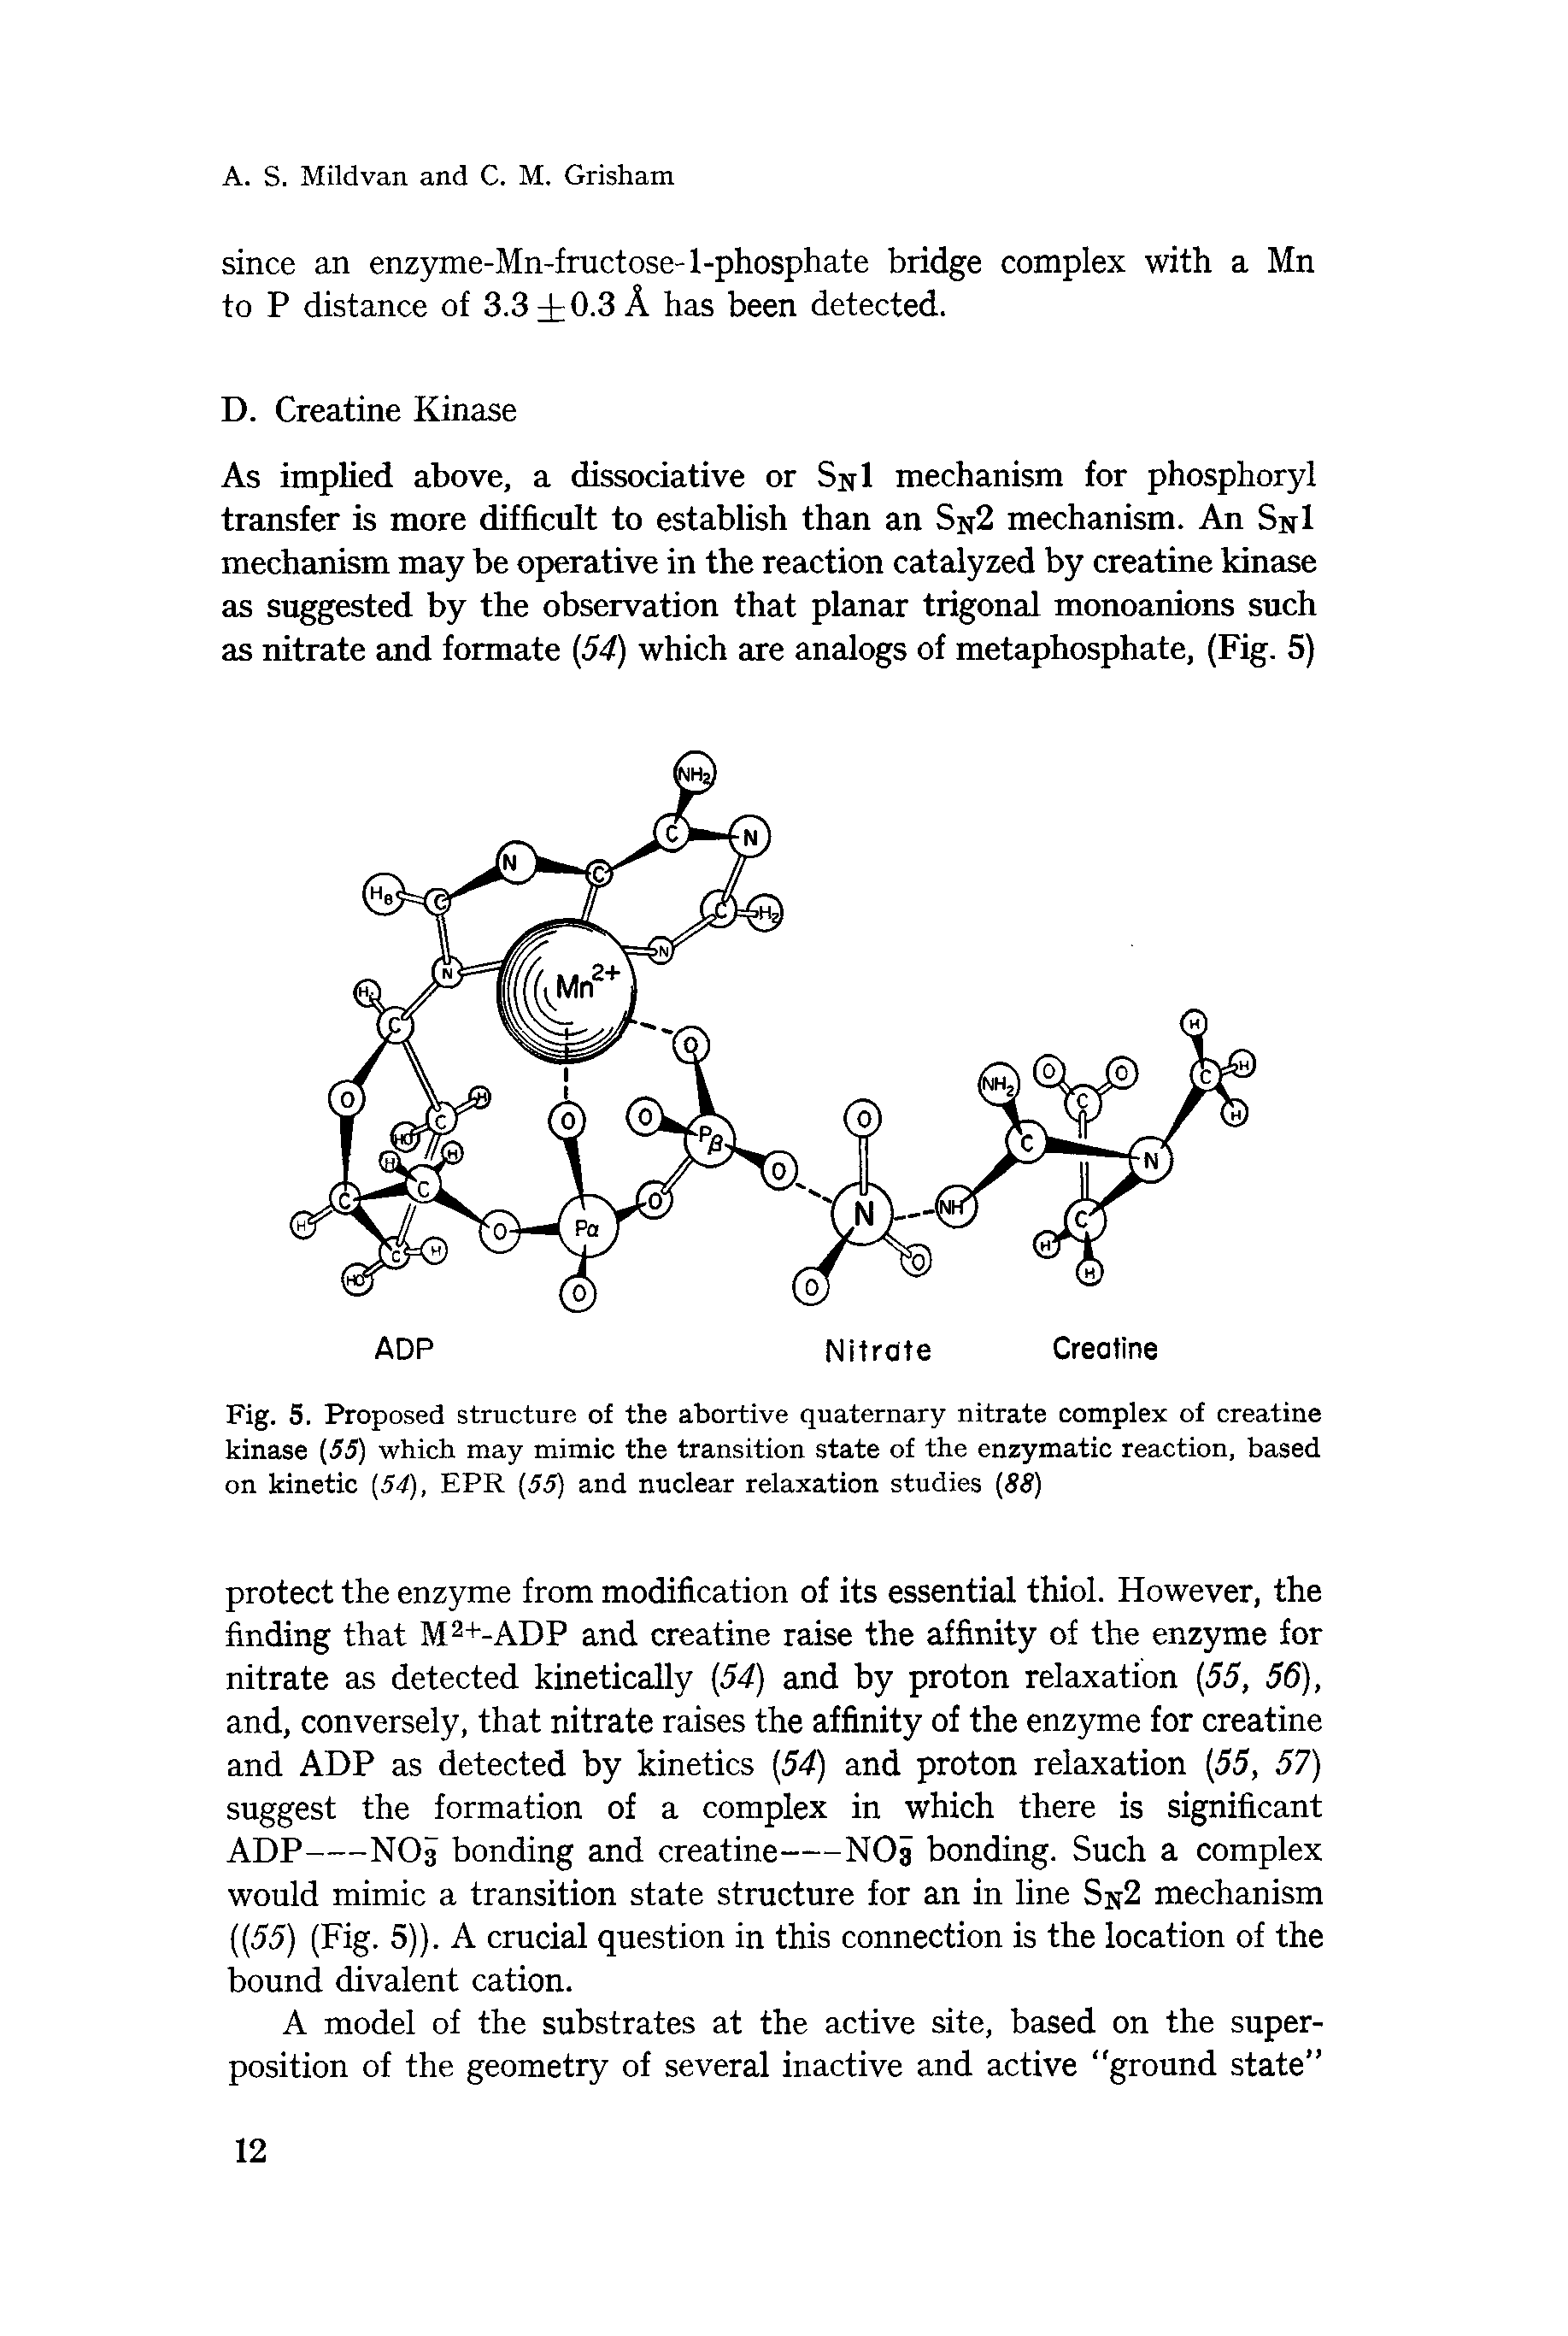 Fig. 5. Proposed structure of the abortive quaternary nitrate complex of creatine kinase (55) which may mimic the transition state of the enzymatic reaction, based on kinetic (54), EPR (55) and nuclear relaxation studies (88)...